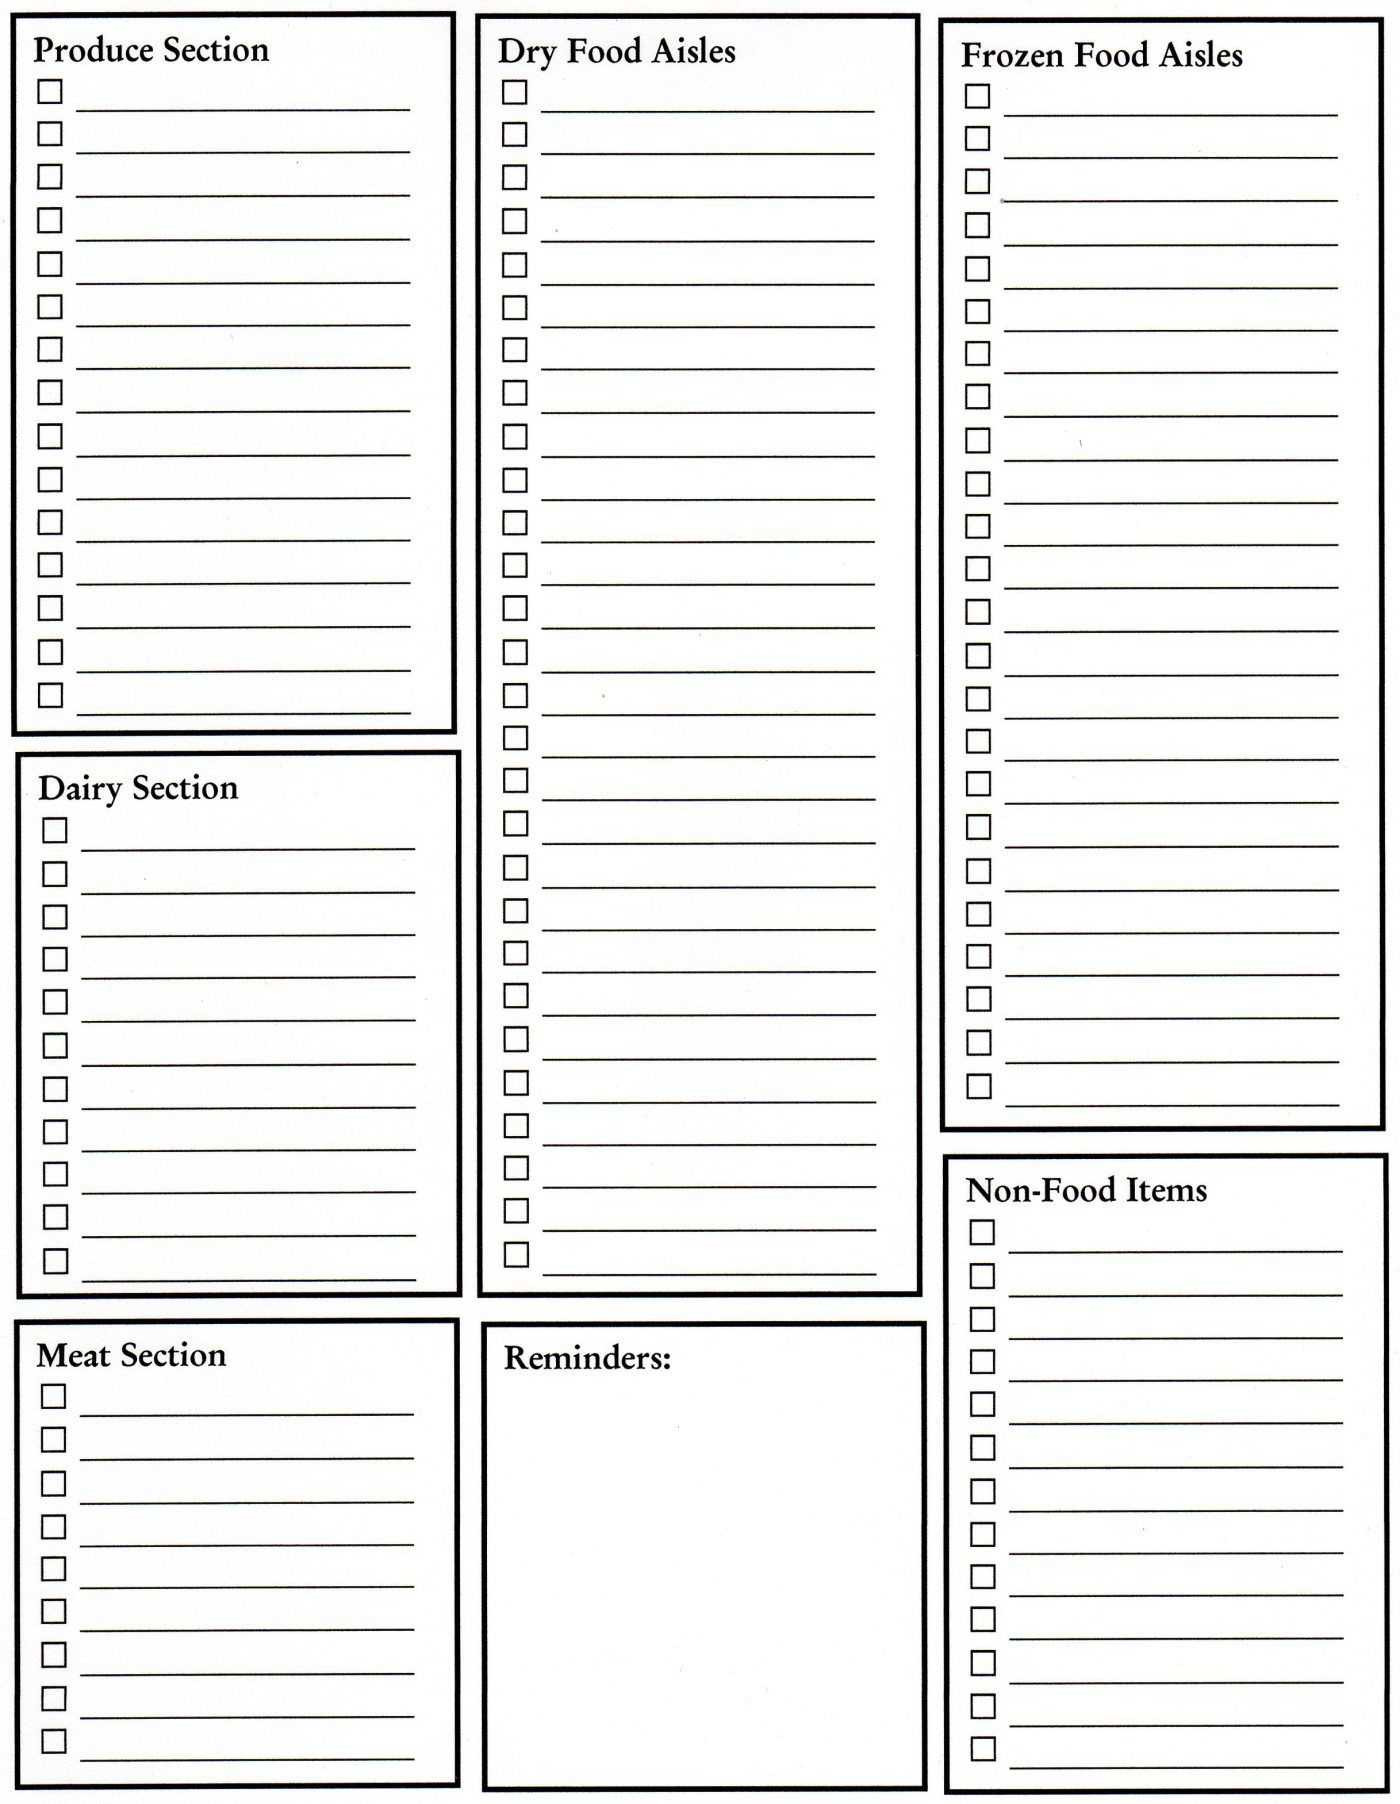 Grocery List Blank Template Great Idea, Need To Keep On Intended For Blank Grocery Shopping List Template